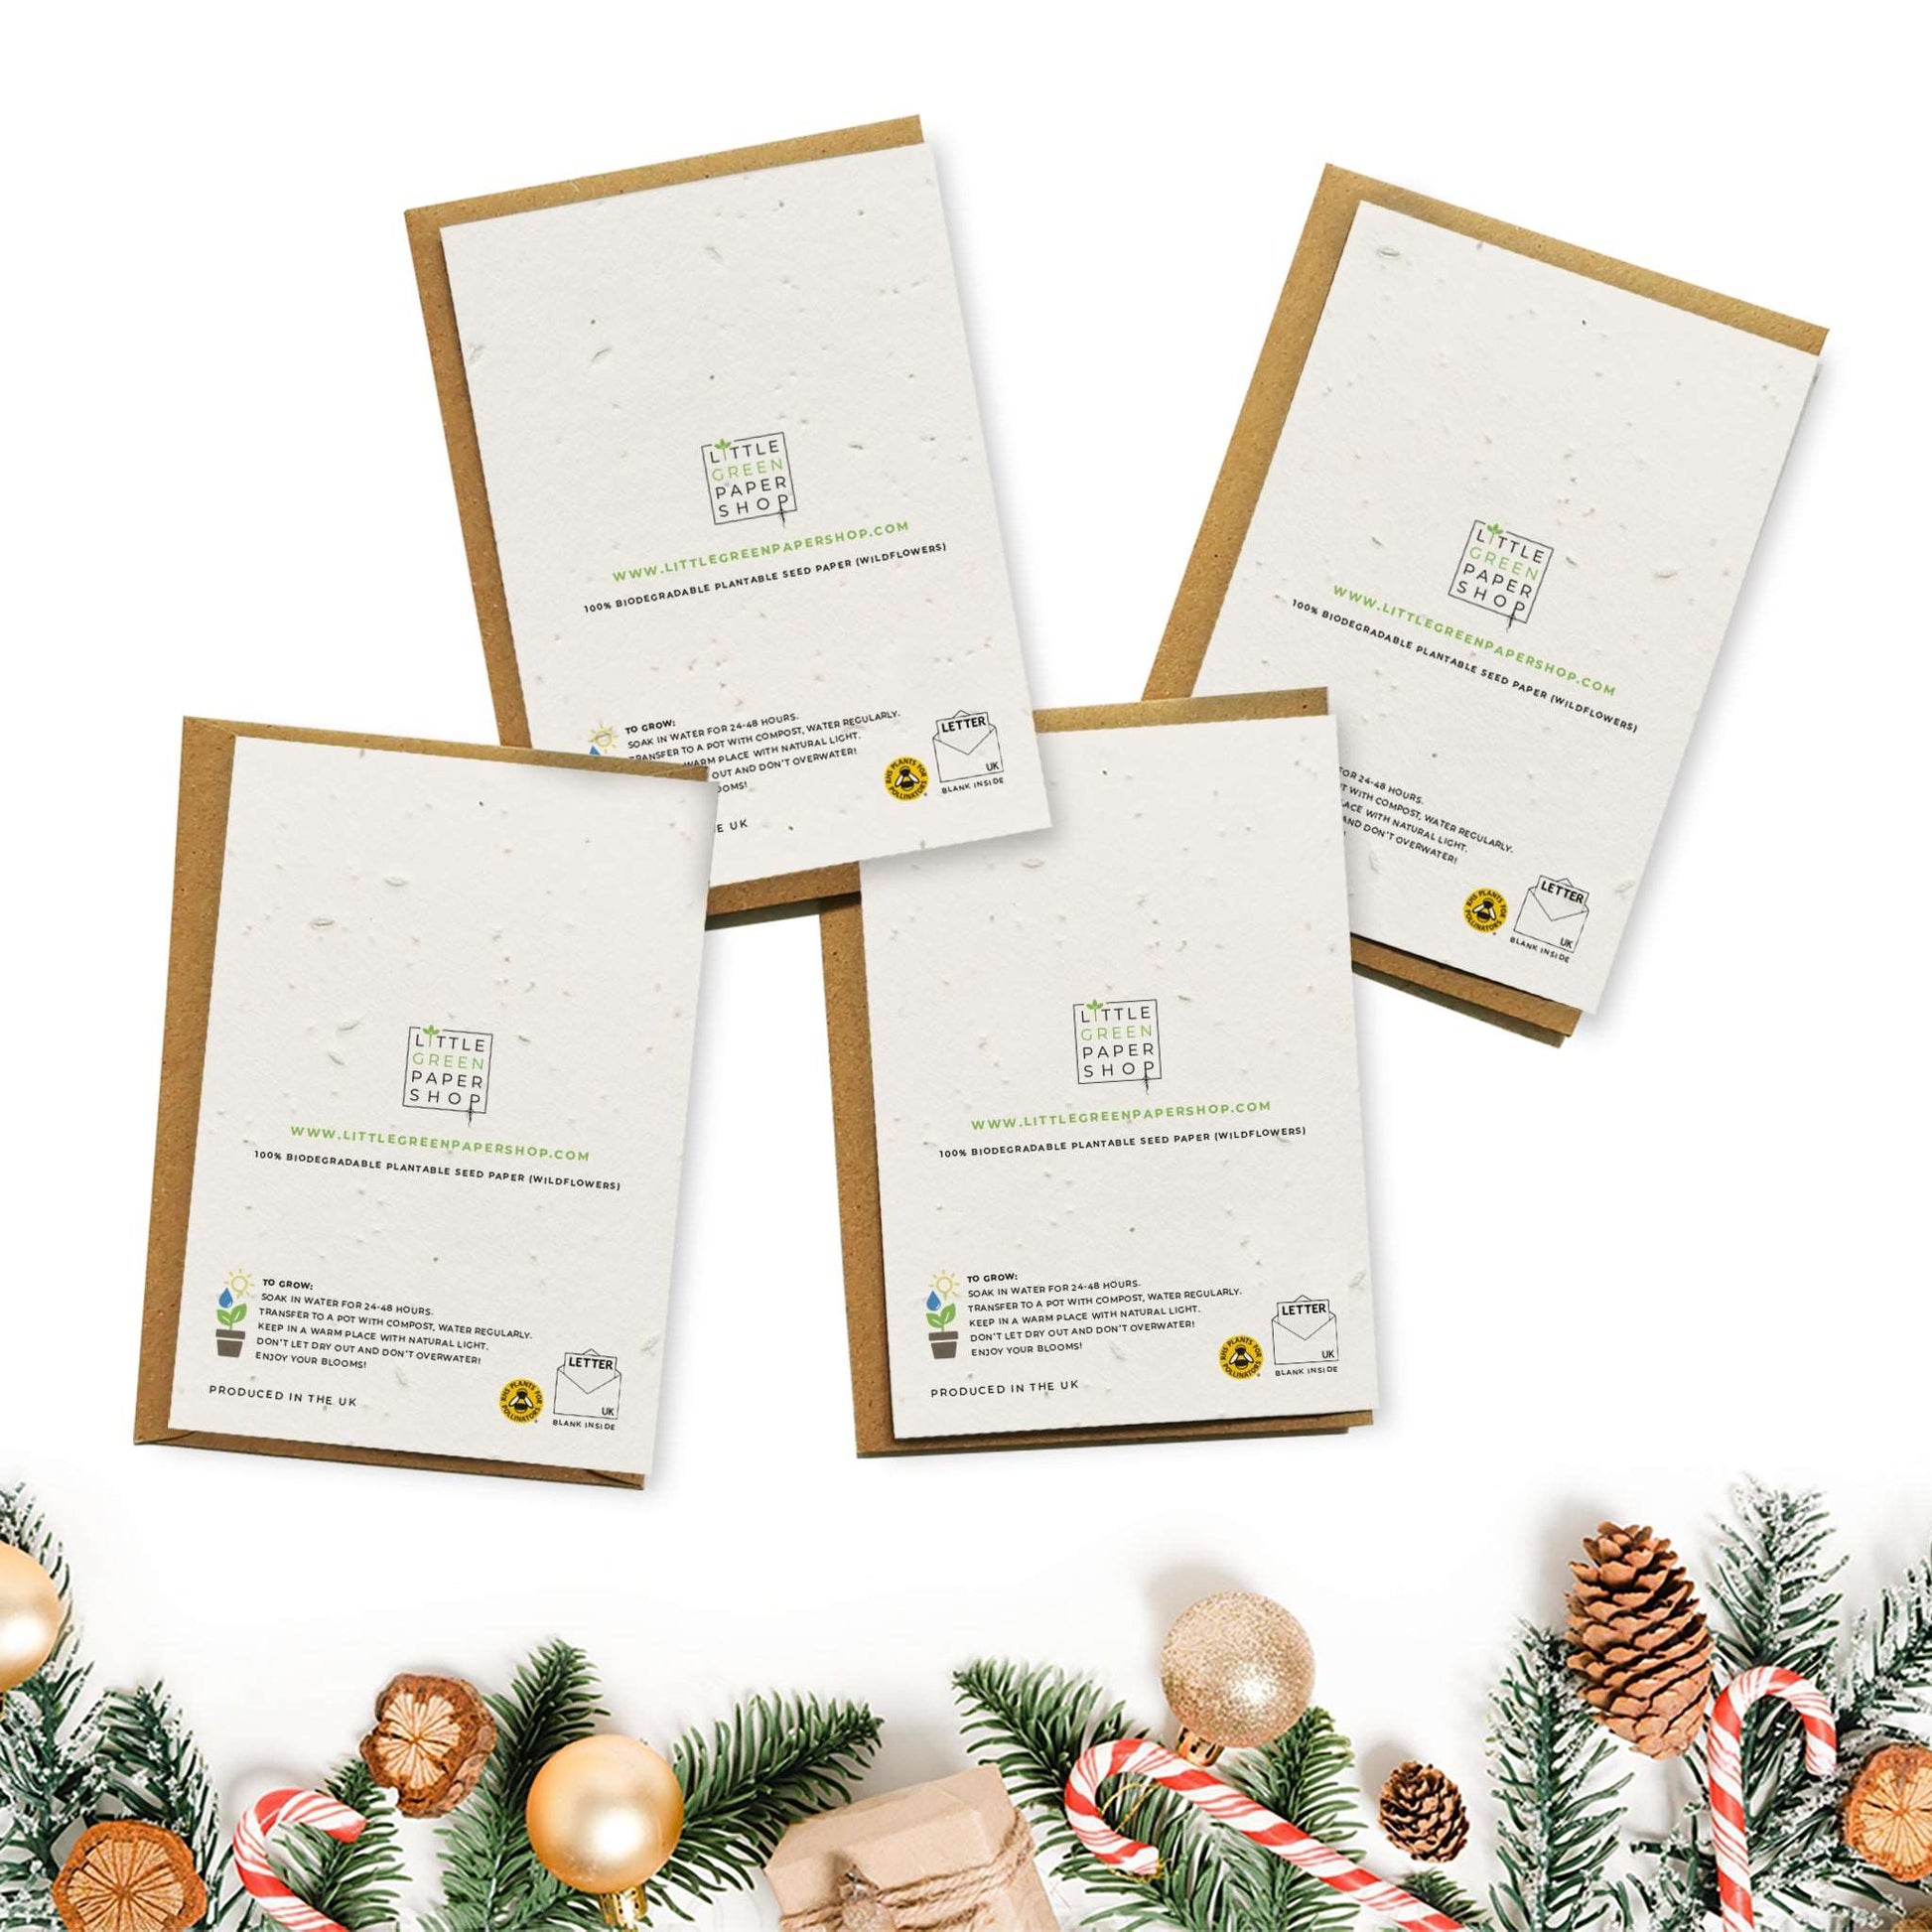 Sustainable Greetings 48-Pack Blank Greeting Cards - Plain Cards and Matching Color Envelopes for DIY Holiday Cards, Thank You Cards, Party